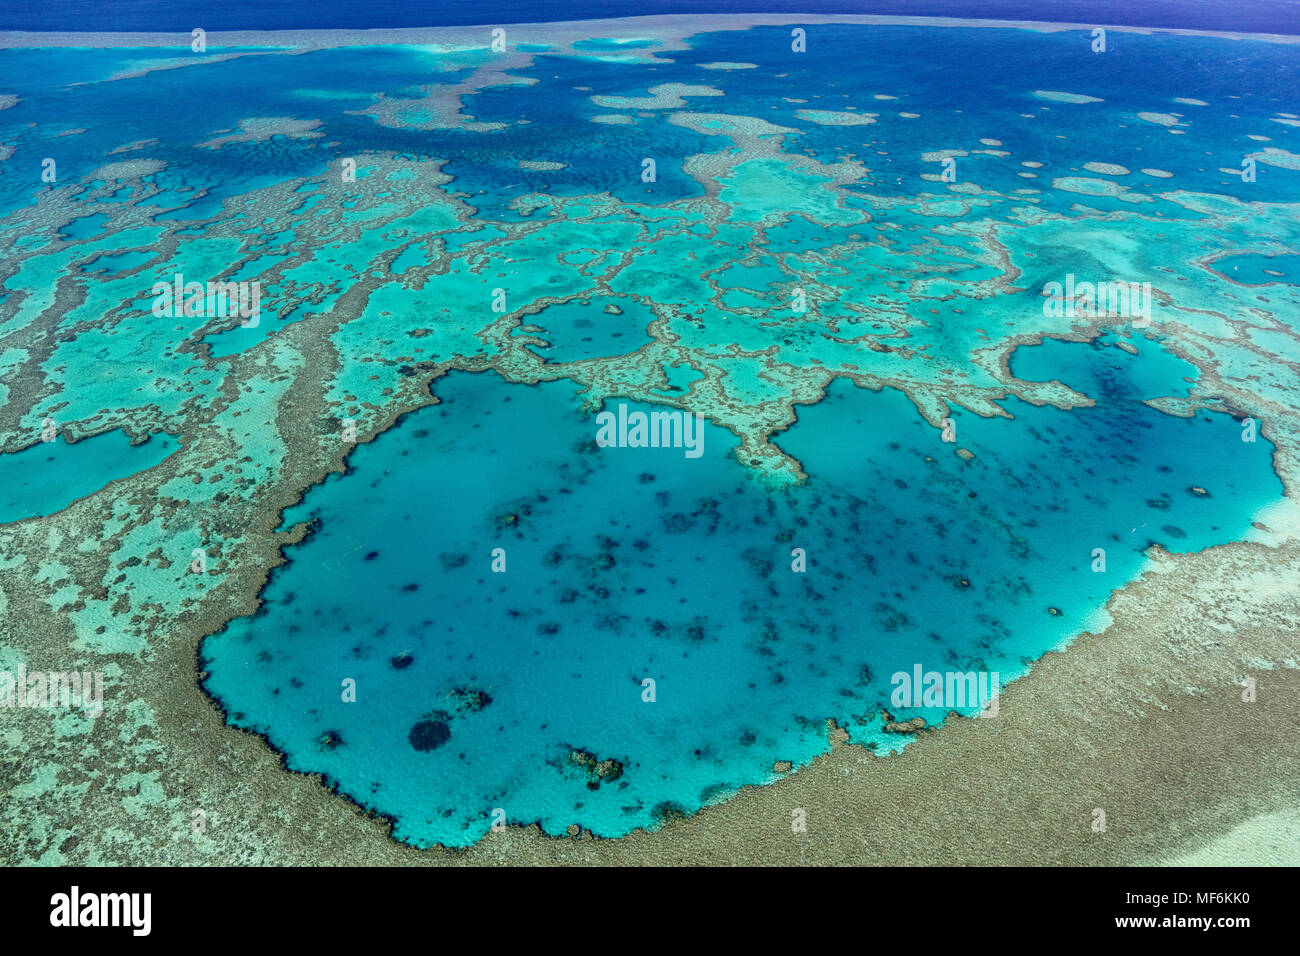 Structures in the Coral Reef, Outer Great Barrier Reef, Queensland, Australia Stock Photo